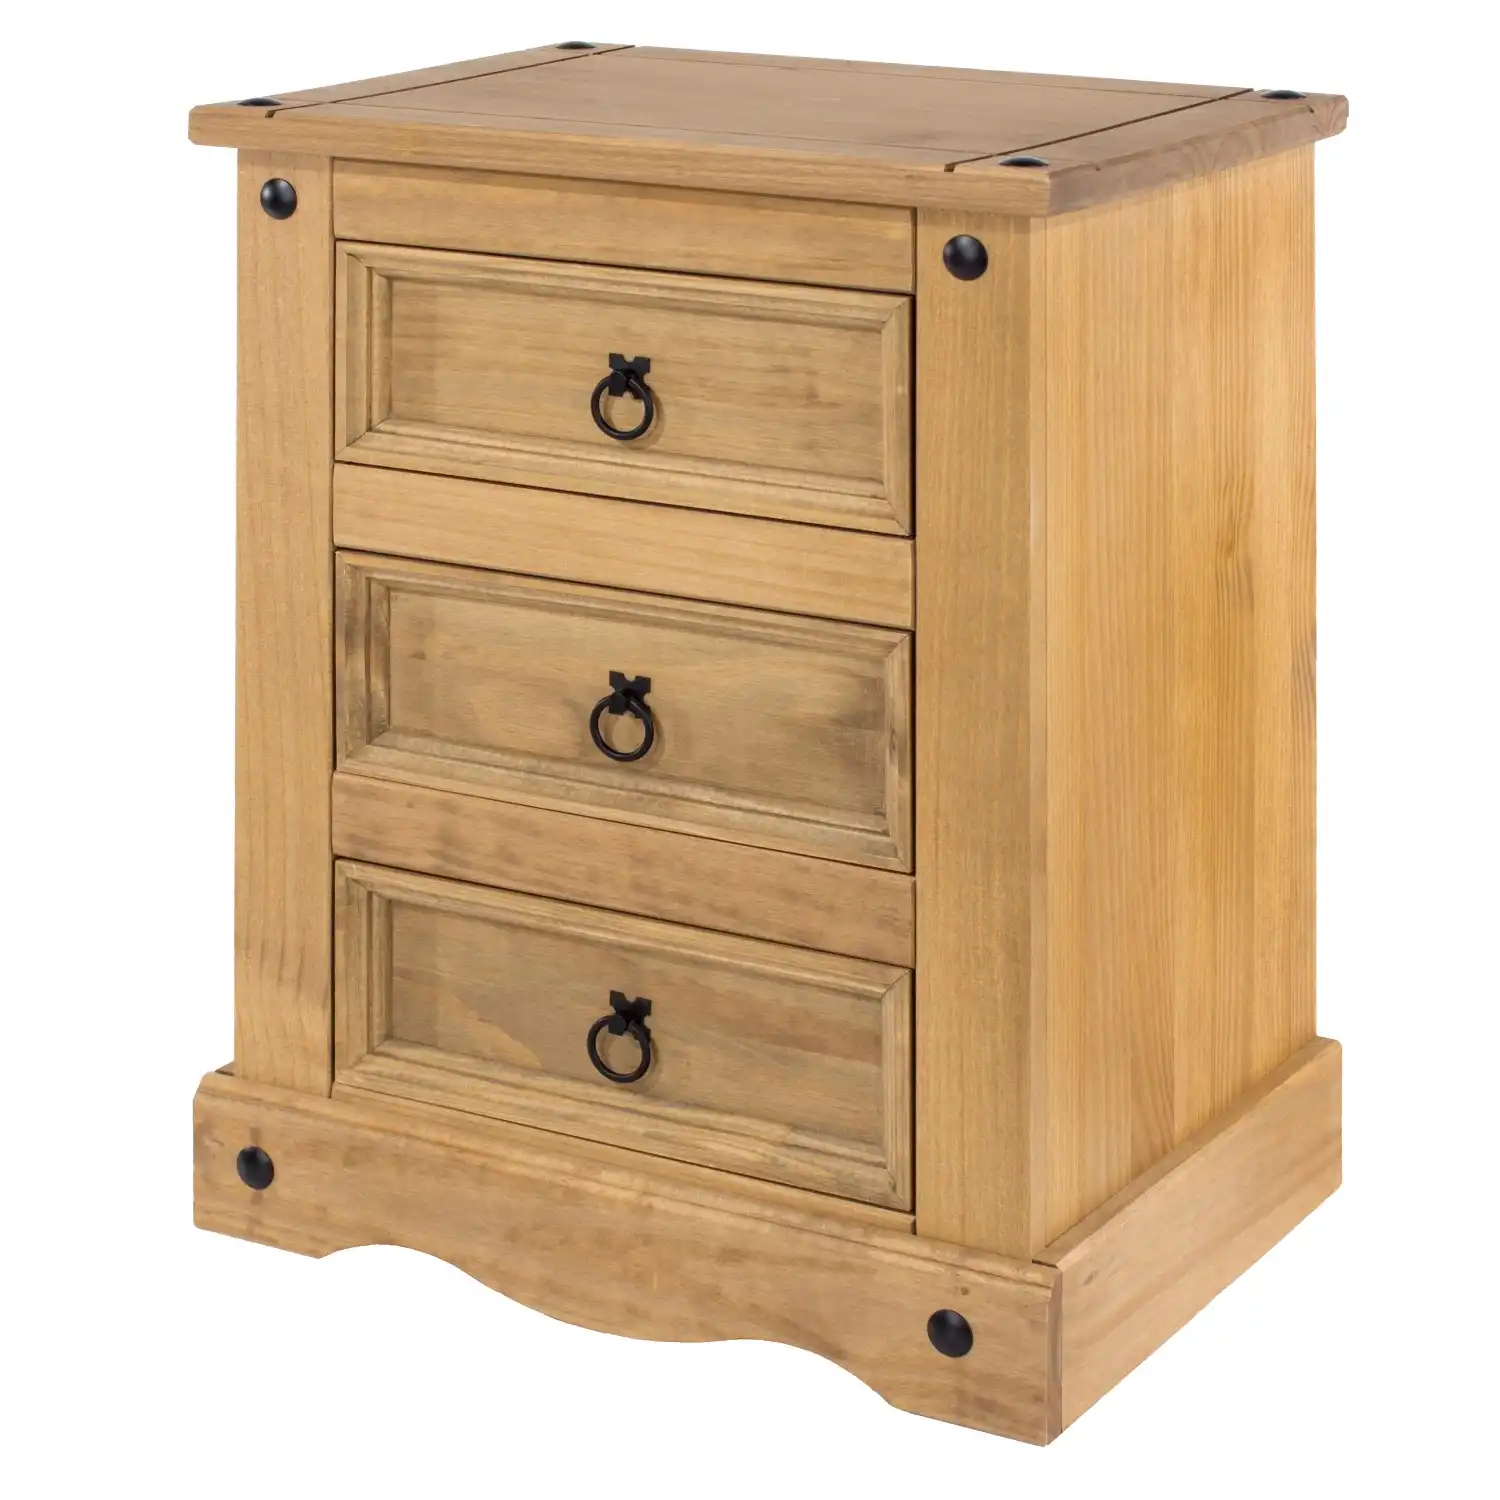 Corona Industrial Natural Solid Pine Wood 3 Drawer Bedside Table Cabinet 68x53x38cm